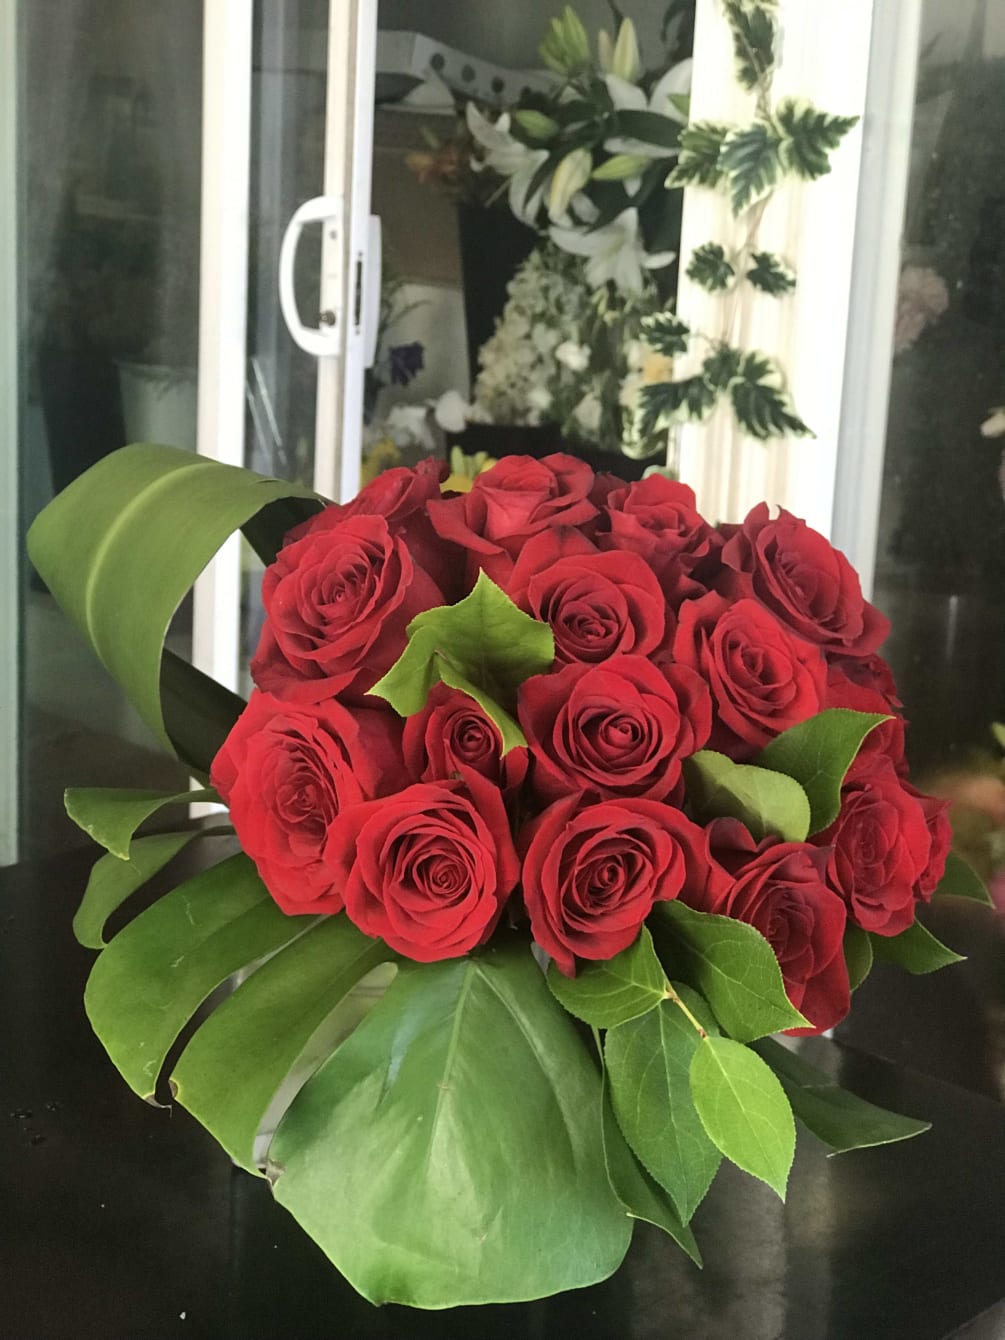 A Beautiful Bouquet Of Red Roses. A Perfect Gift To Your Most